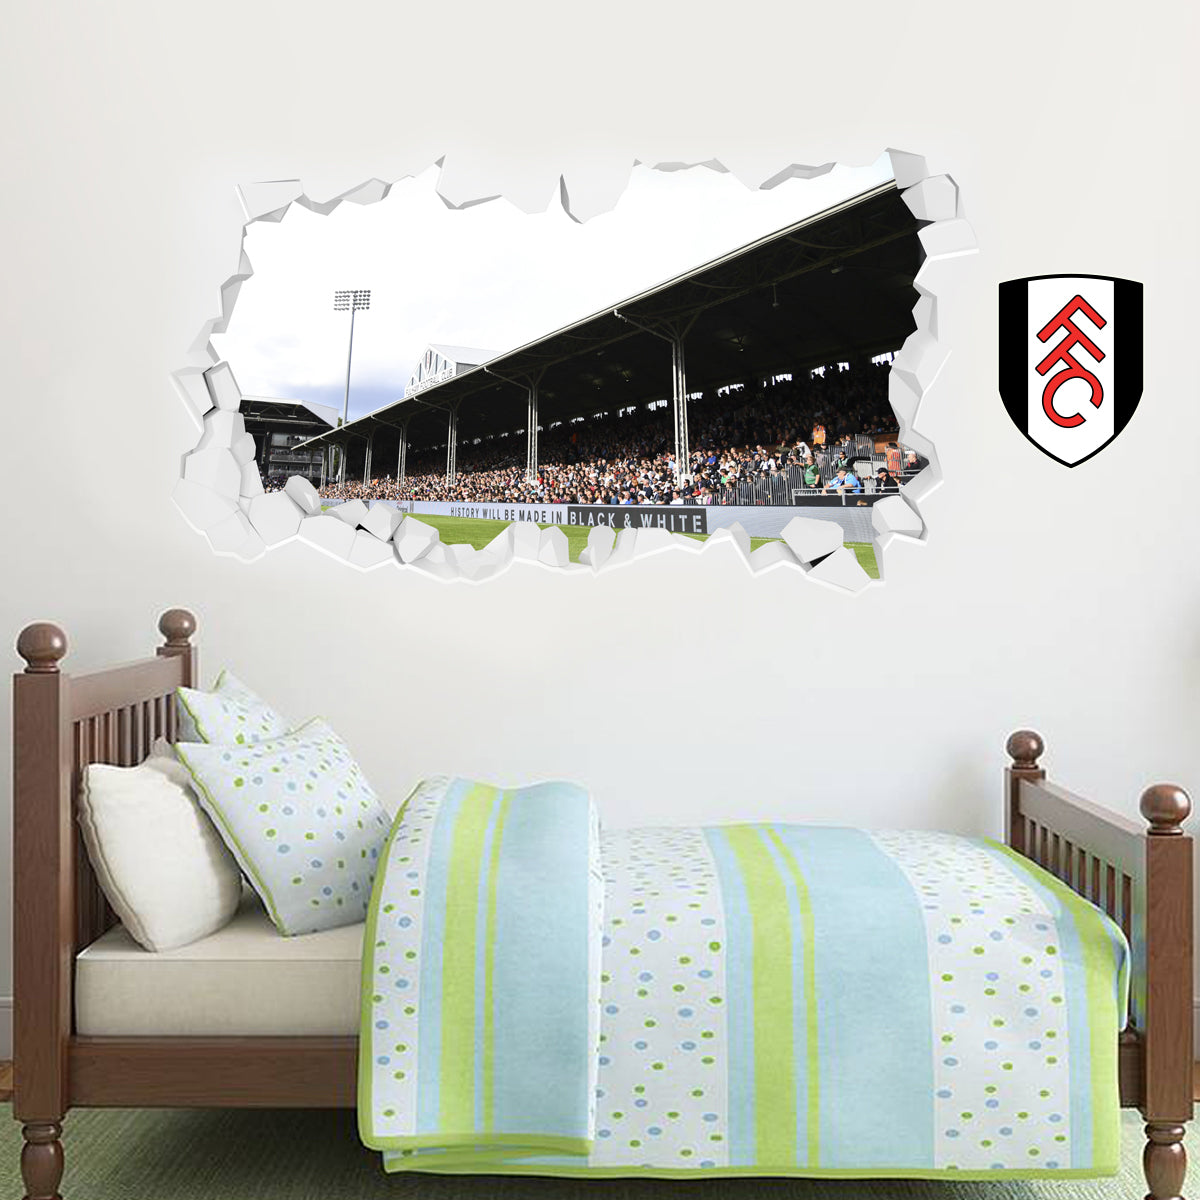 Fulham Stadium Smashed Wall Mural Crest Wall Sticker